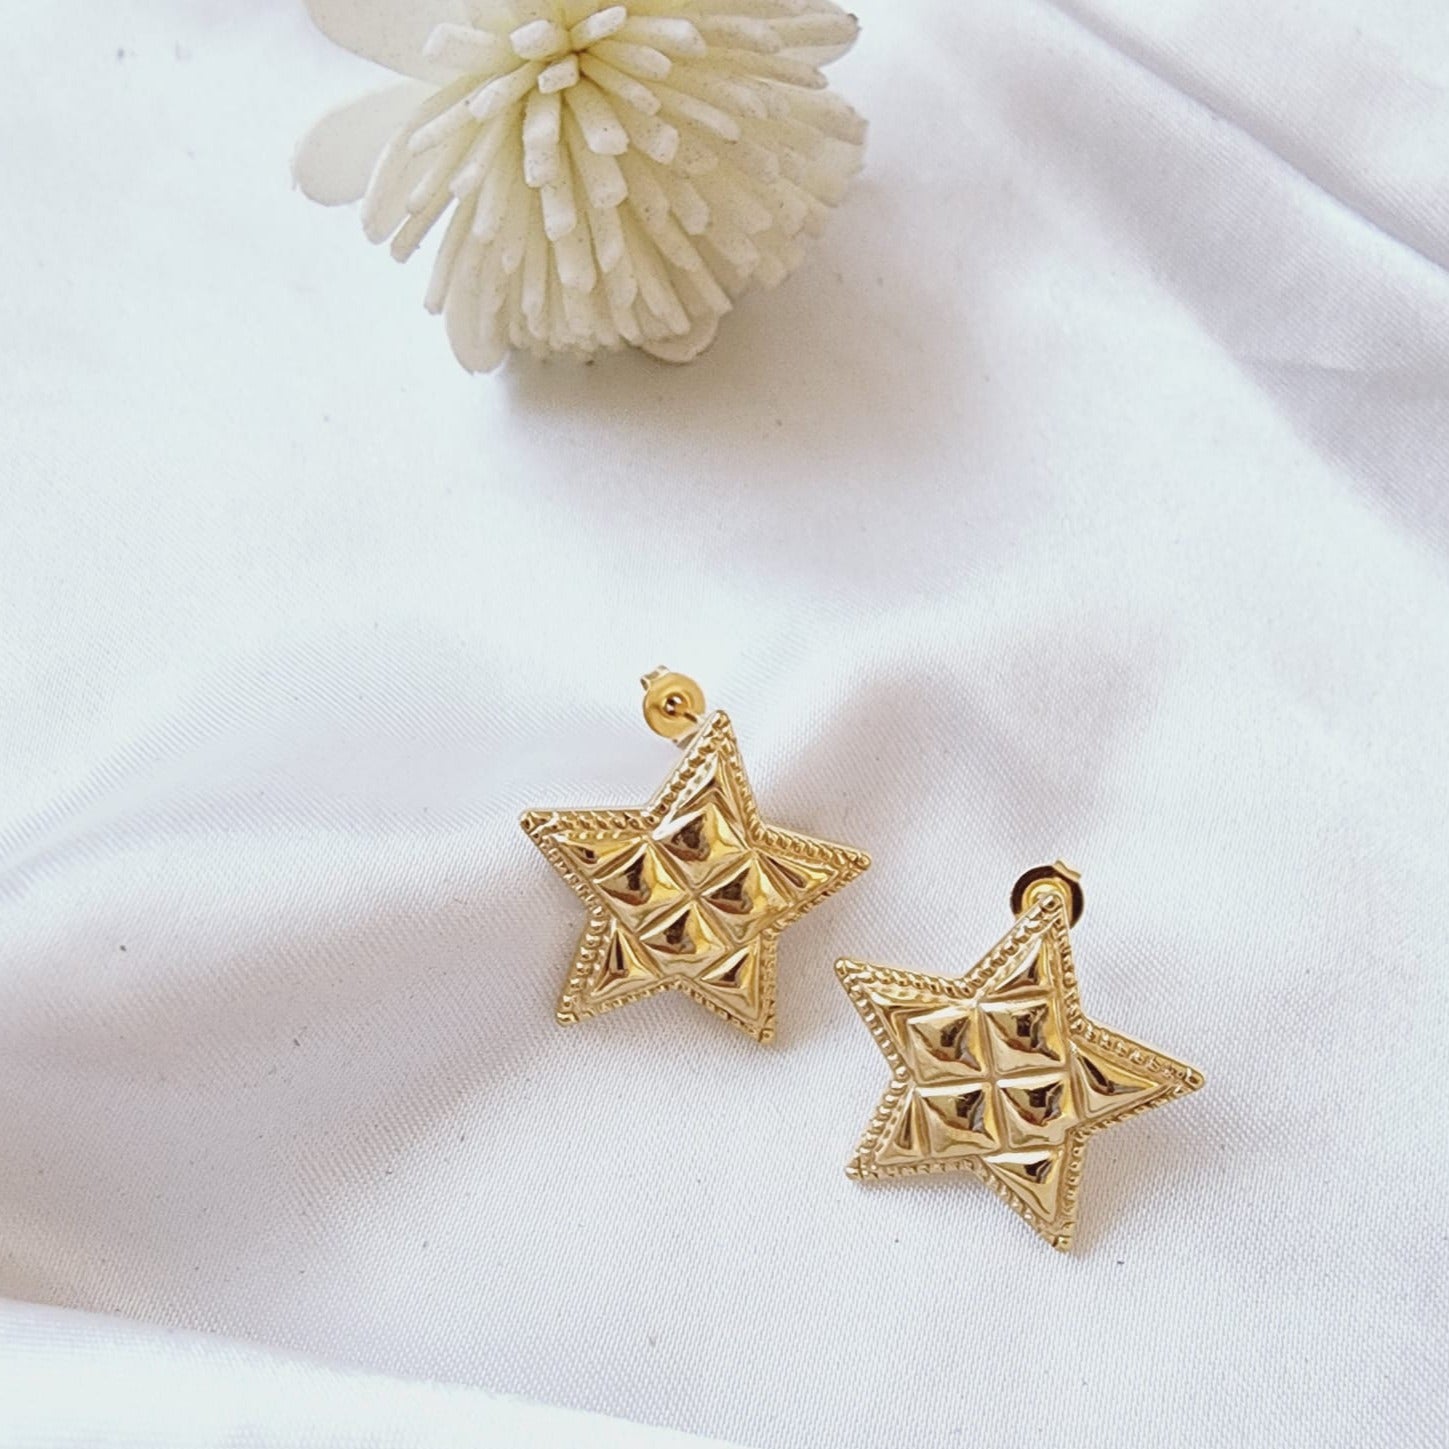 hypoallergenic earrings, Star studs, 18k gold plated earrings, Waterproof earrings, Silver and gold, Durable earrings, Elegant earrings, Timeless design, aesthetic earrings, timeless earrings, Fashion accessories, Stylish jewelry, stylish earrings, Versatile jewelry,  Special occasion jewelry, Everyday earrings, Premium quality studs, Affordable luxury Hypoallergenic earrings waterproof earrings, water resistant earrings, silver studs, gold studs